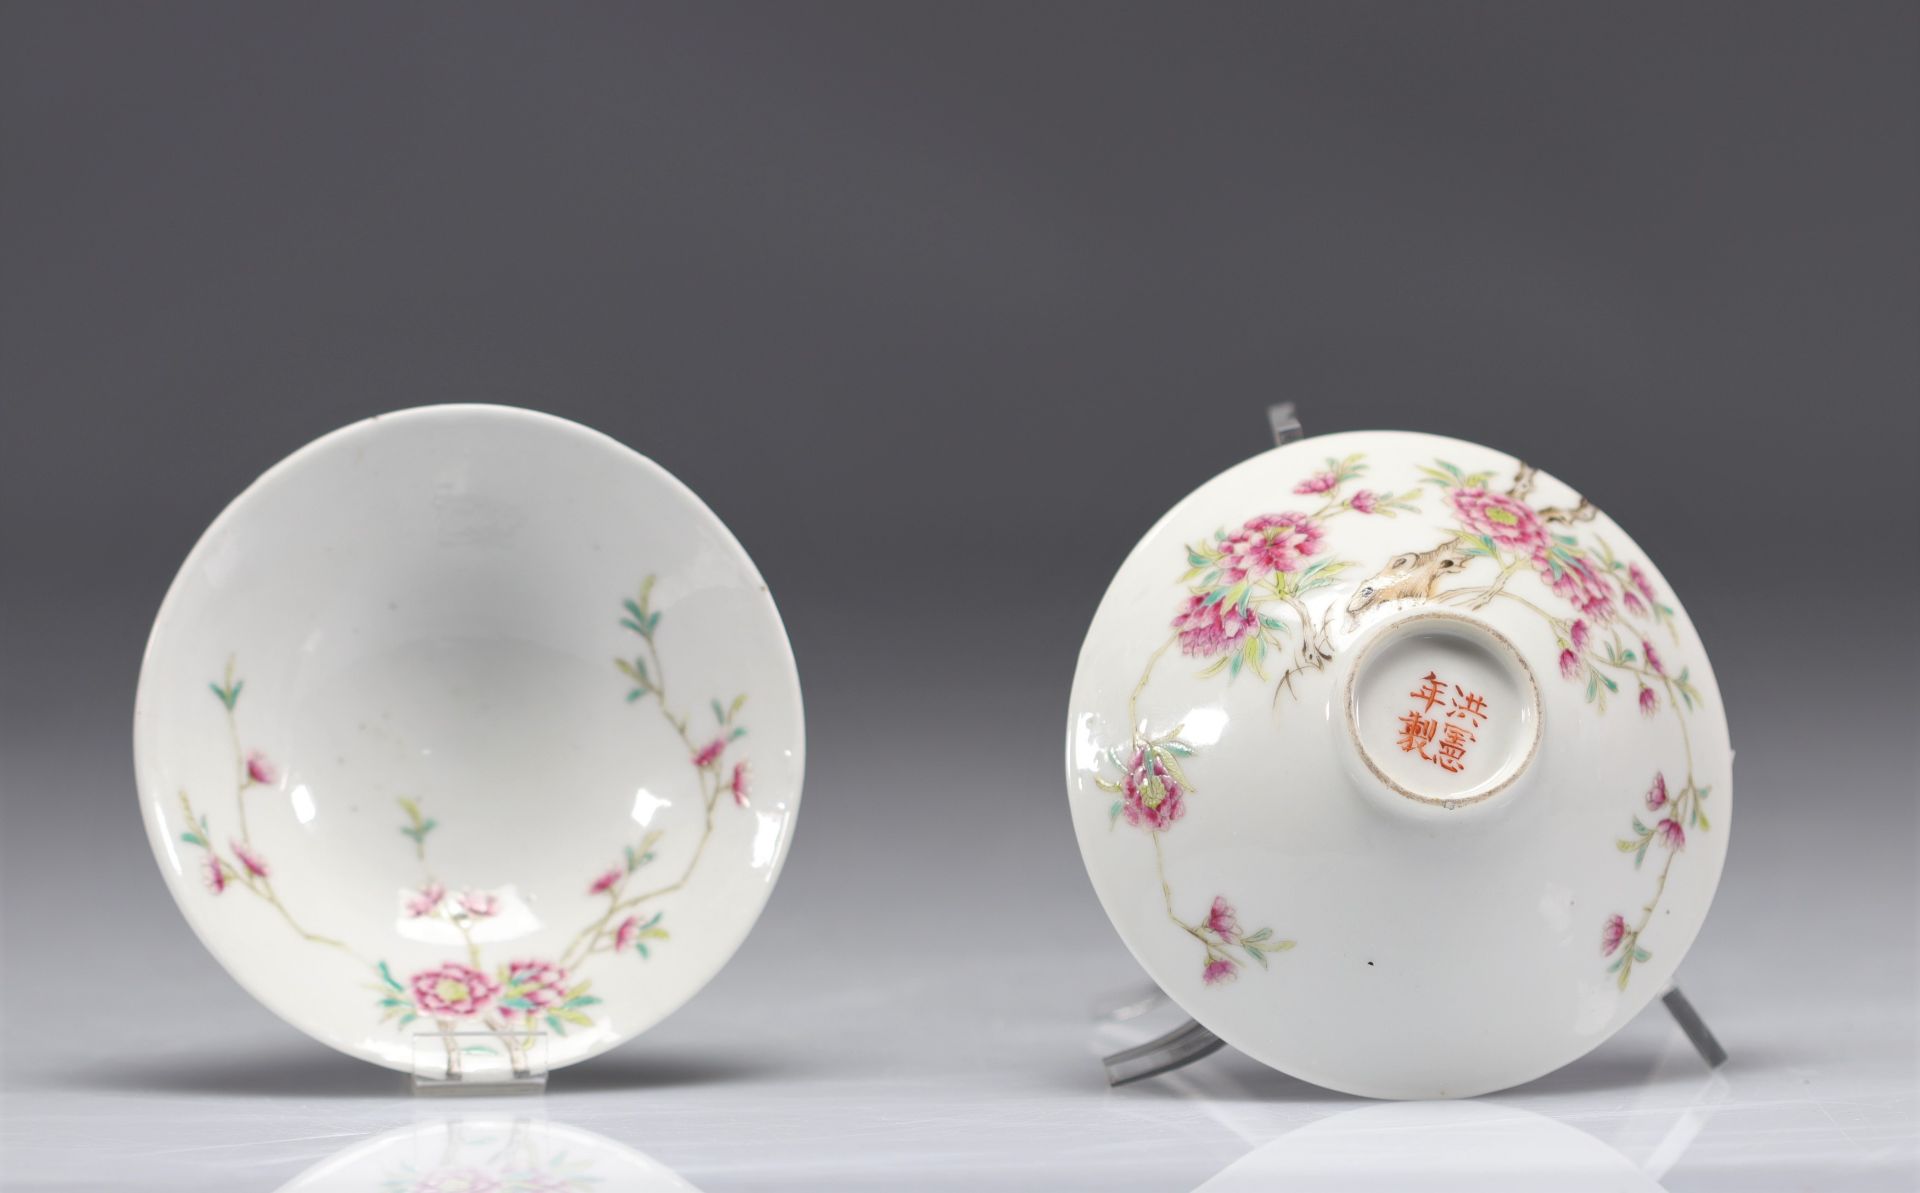 (2) A famille rose porcelain bowl decorated with pink flowers from China, Hongxian period (1915-1916